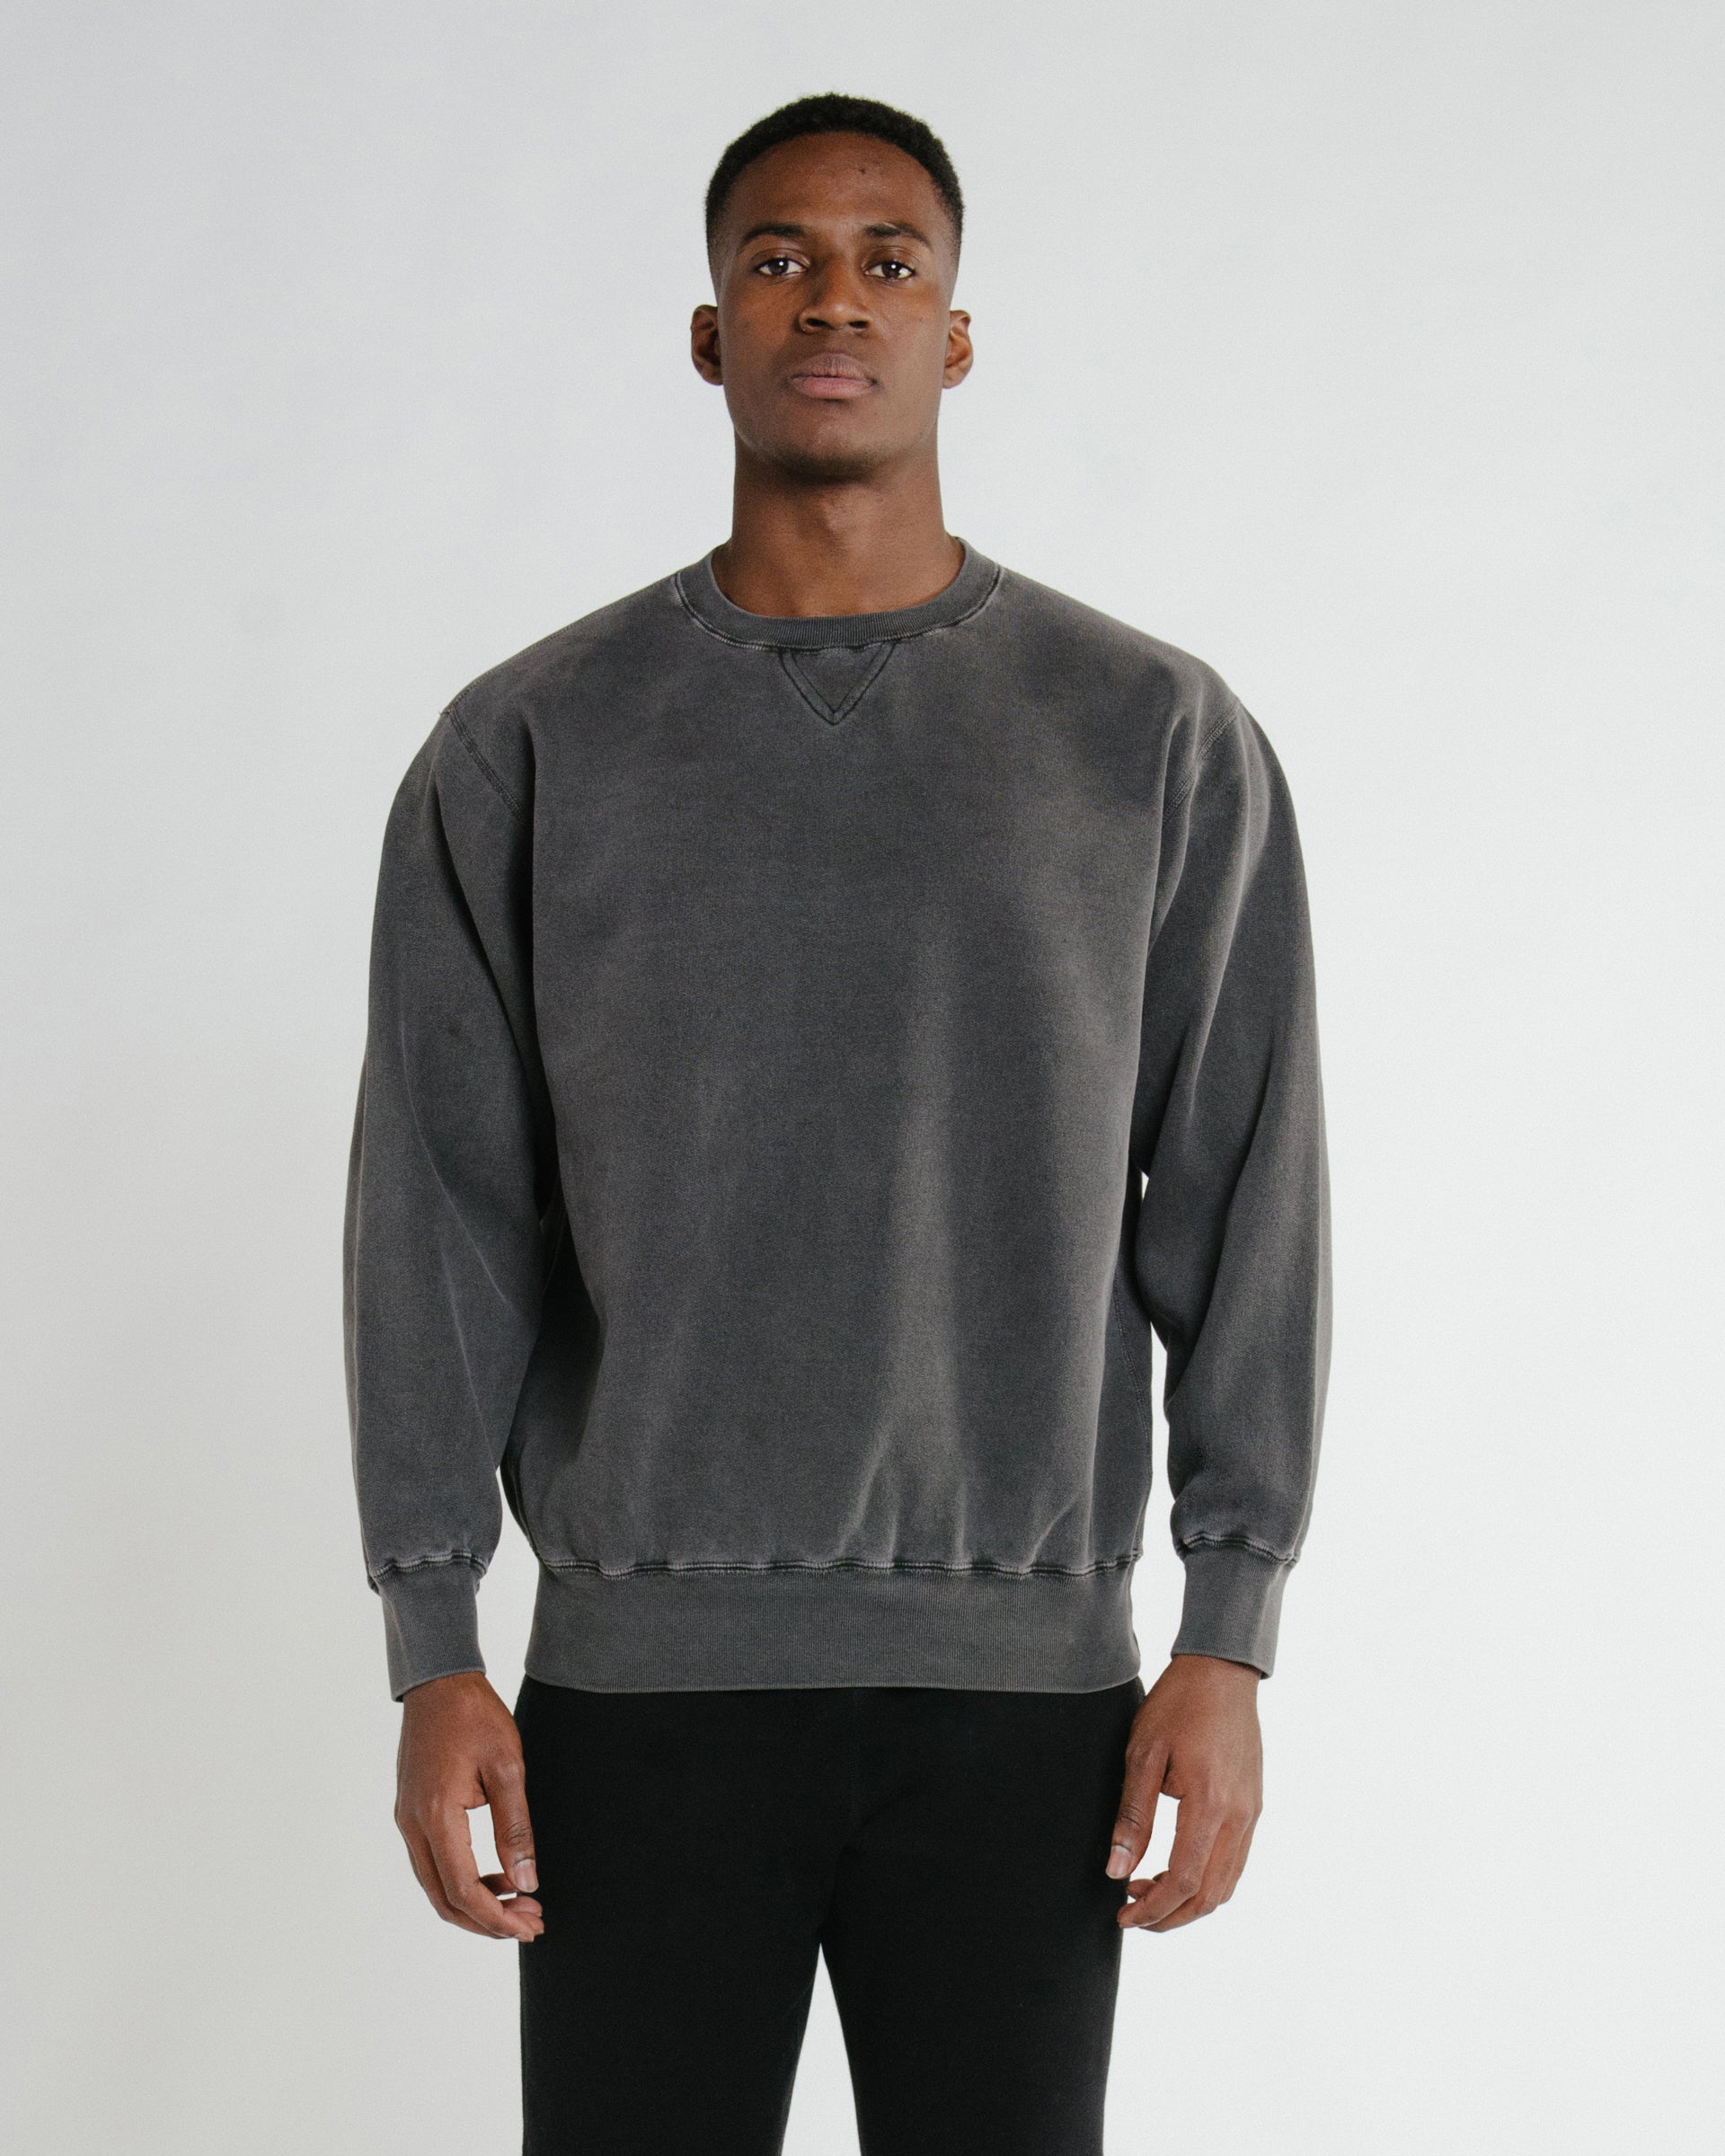 Rosewater, Pure Cashmere Relaxed Crew Neck Sweater